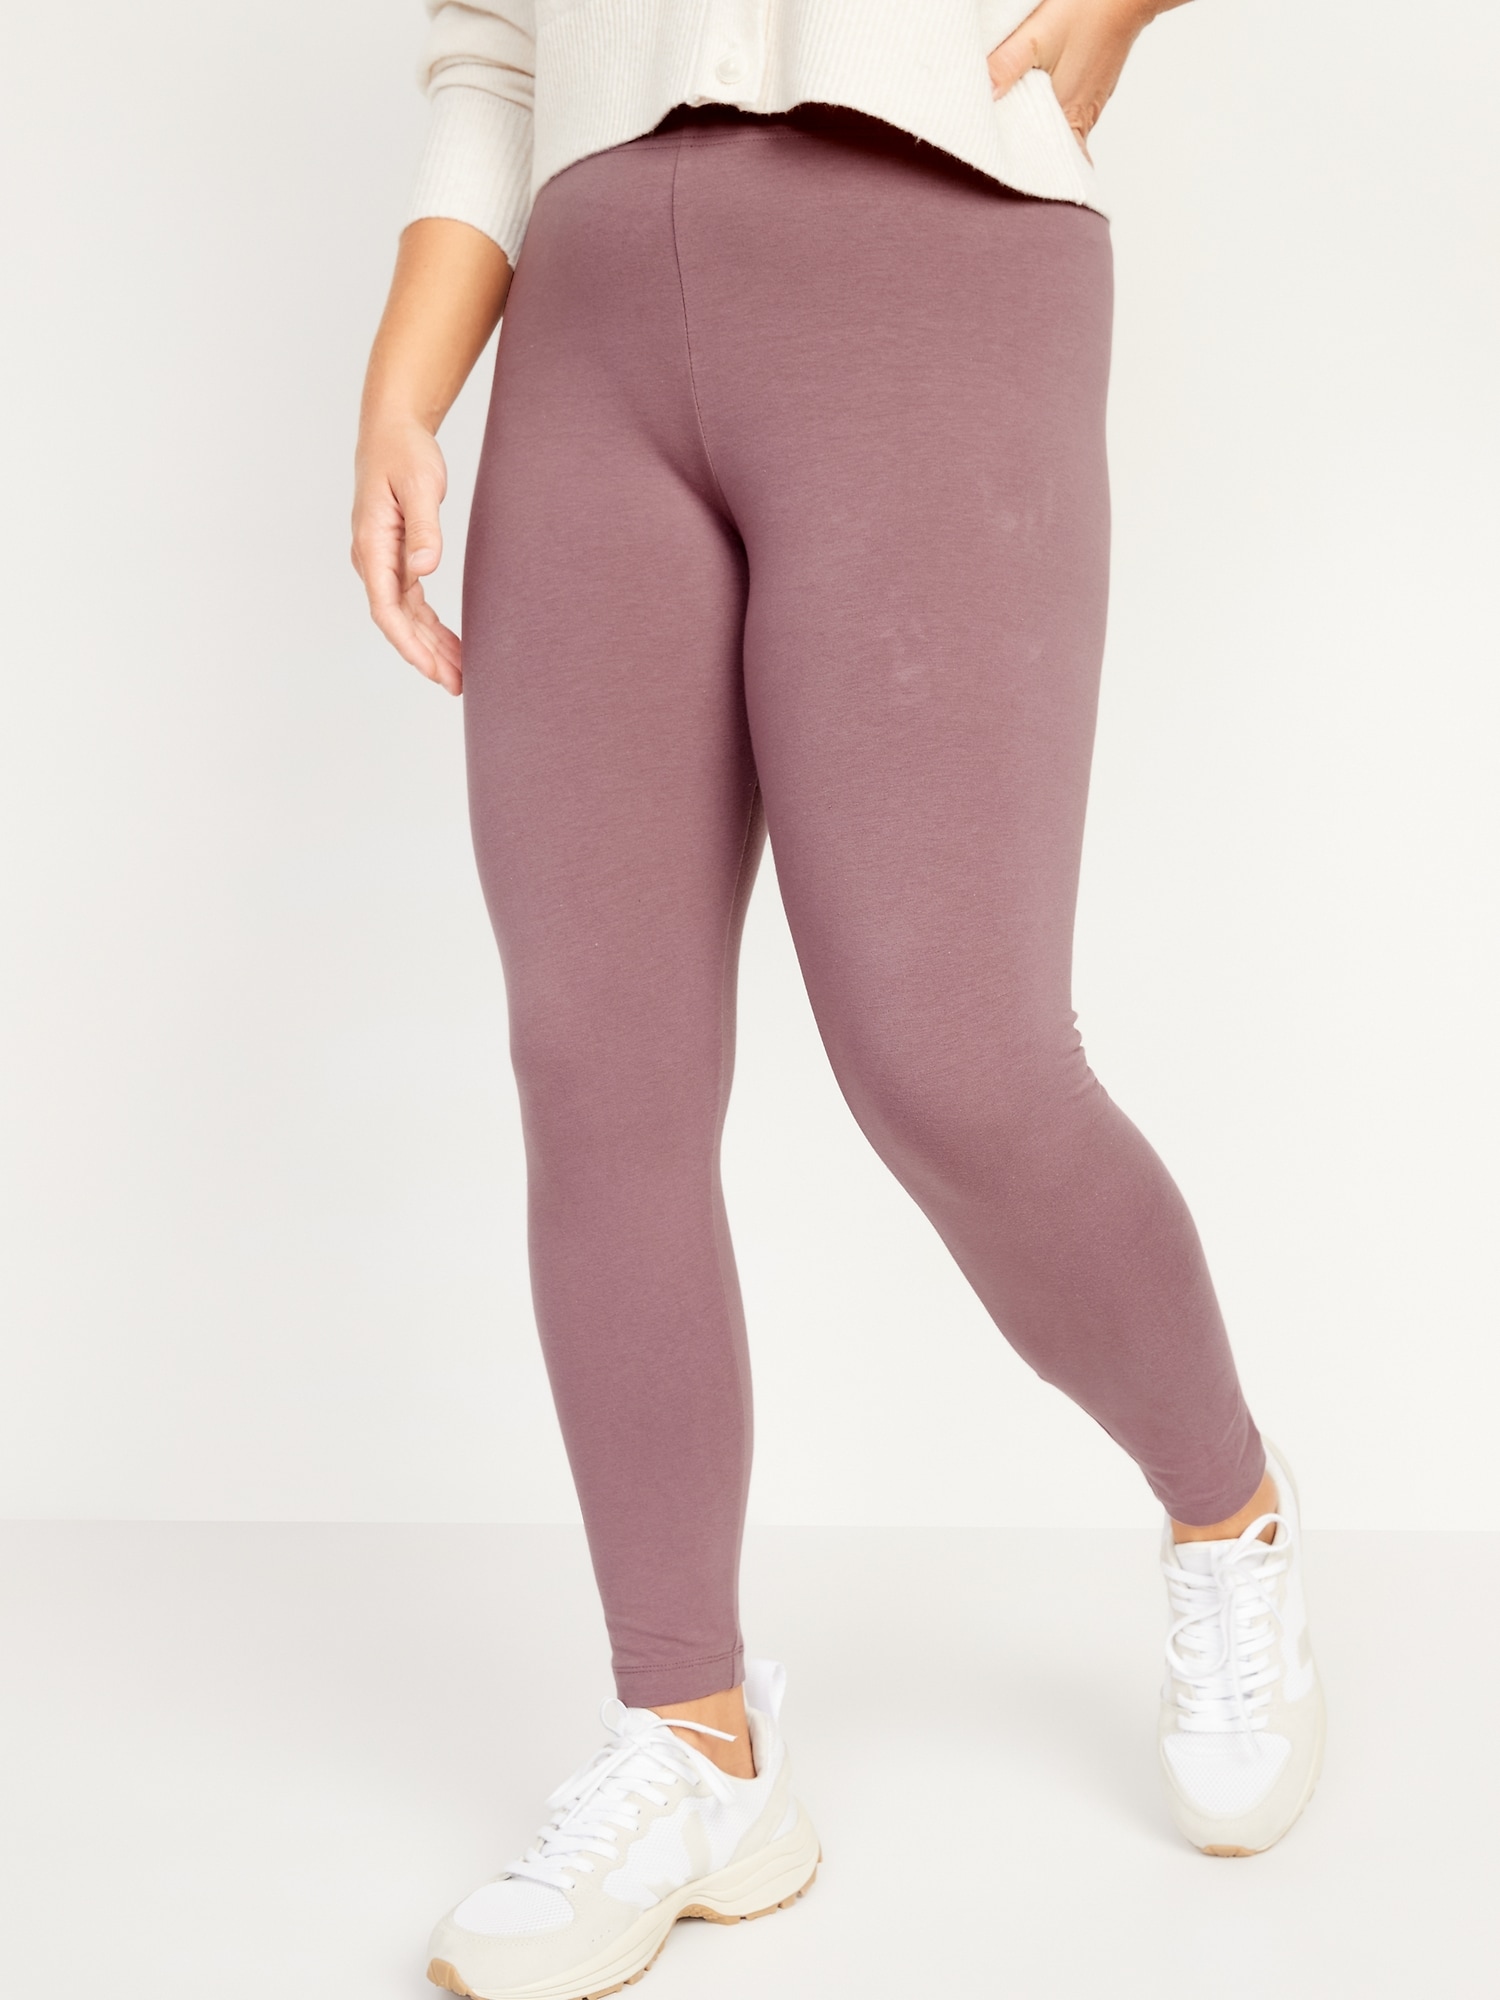 High Waisted Jersey Ankle Leggings For Women Old Navy 7450